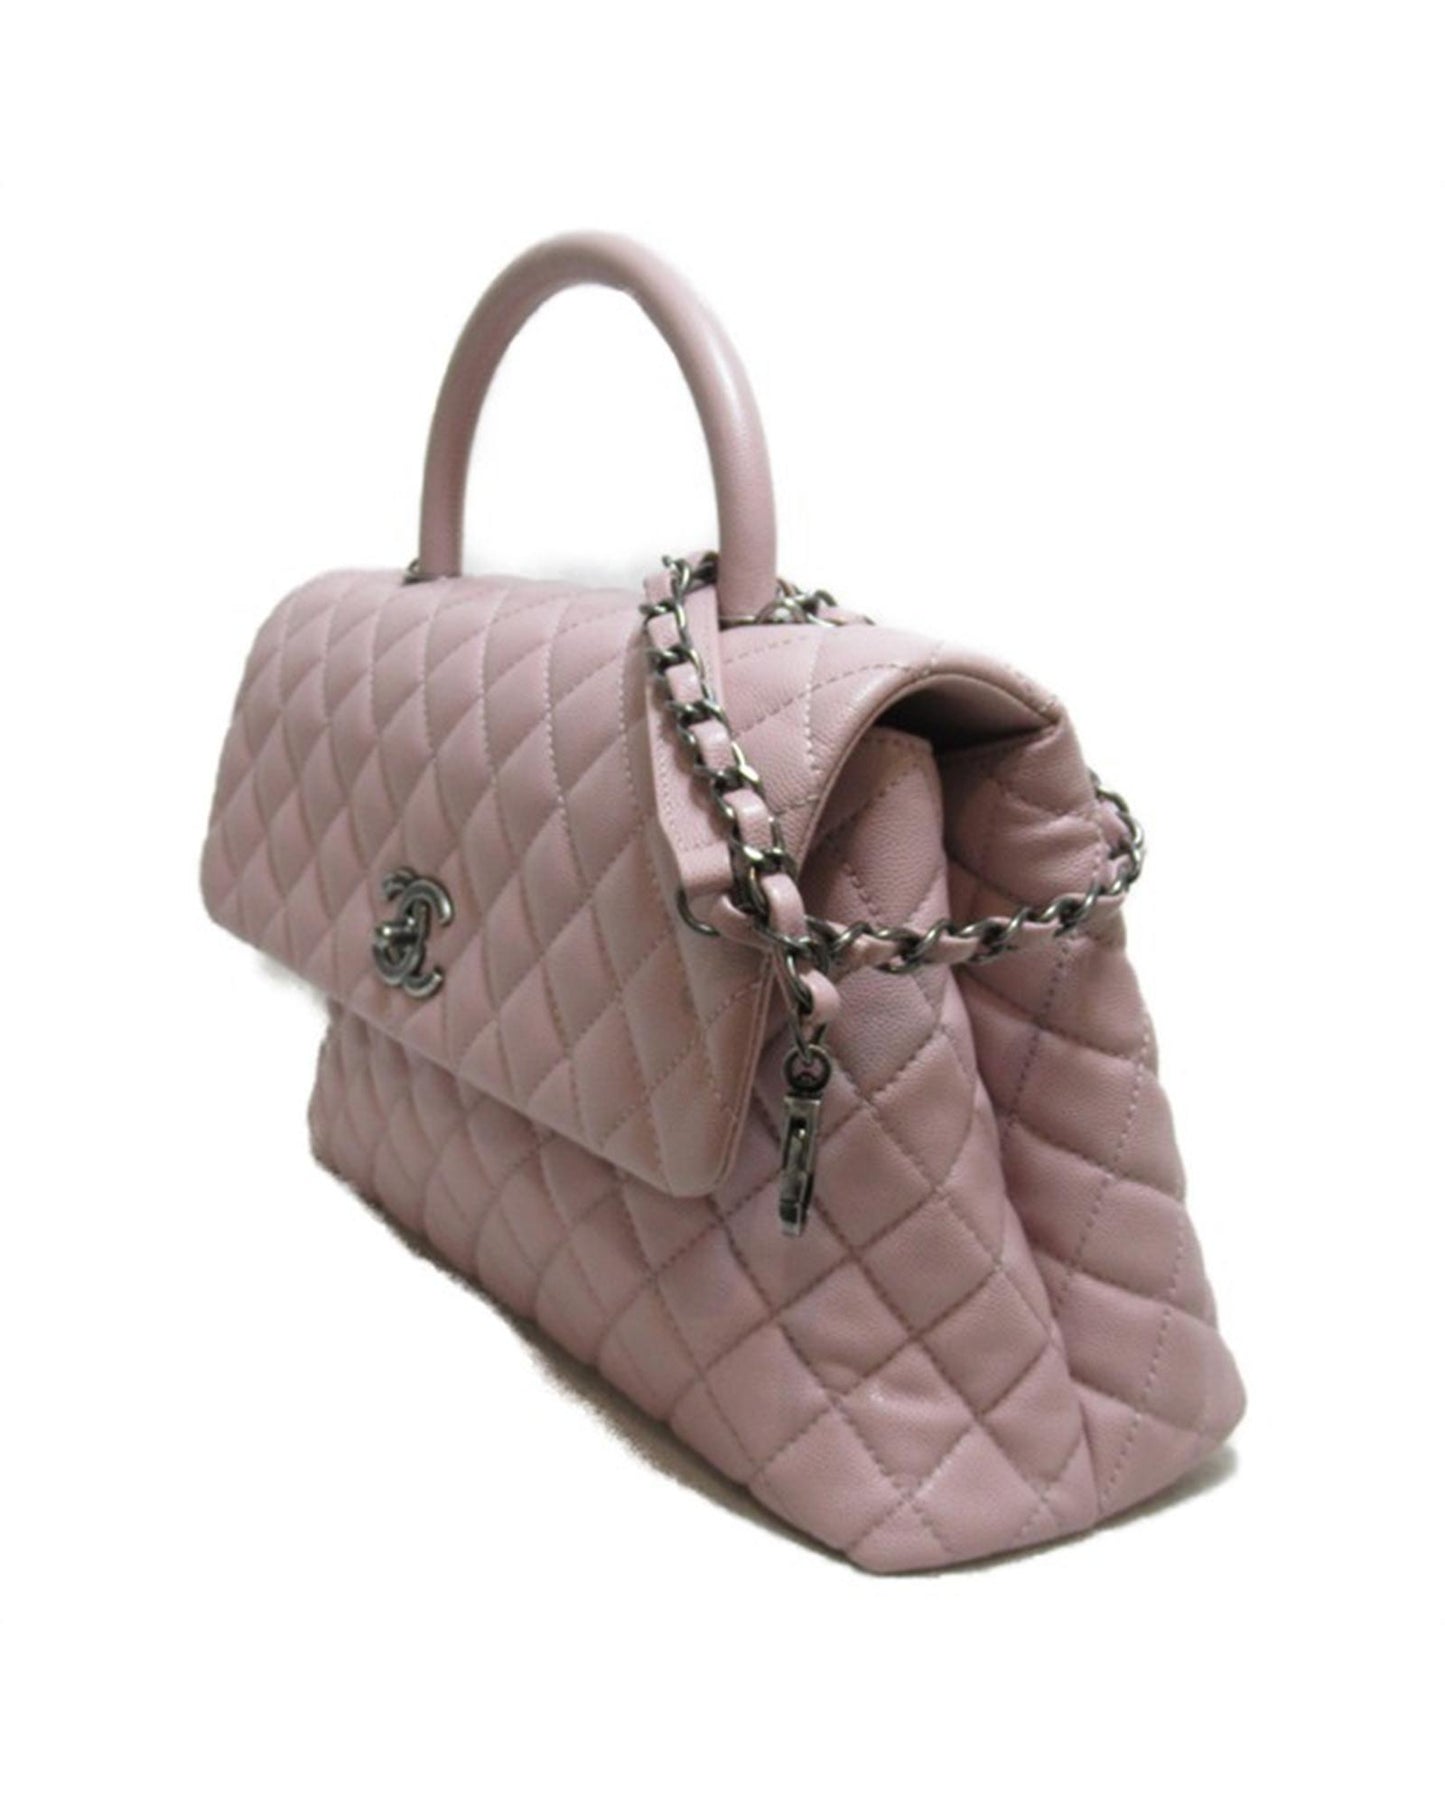 Chanel Women's Caviar Medium Coco Handle Bag in Pink by Chanel in Pink